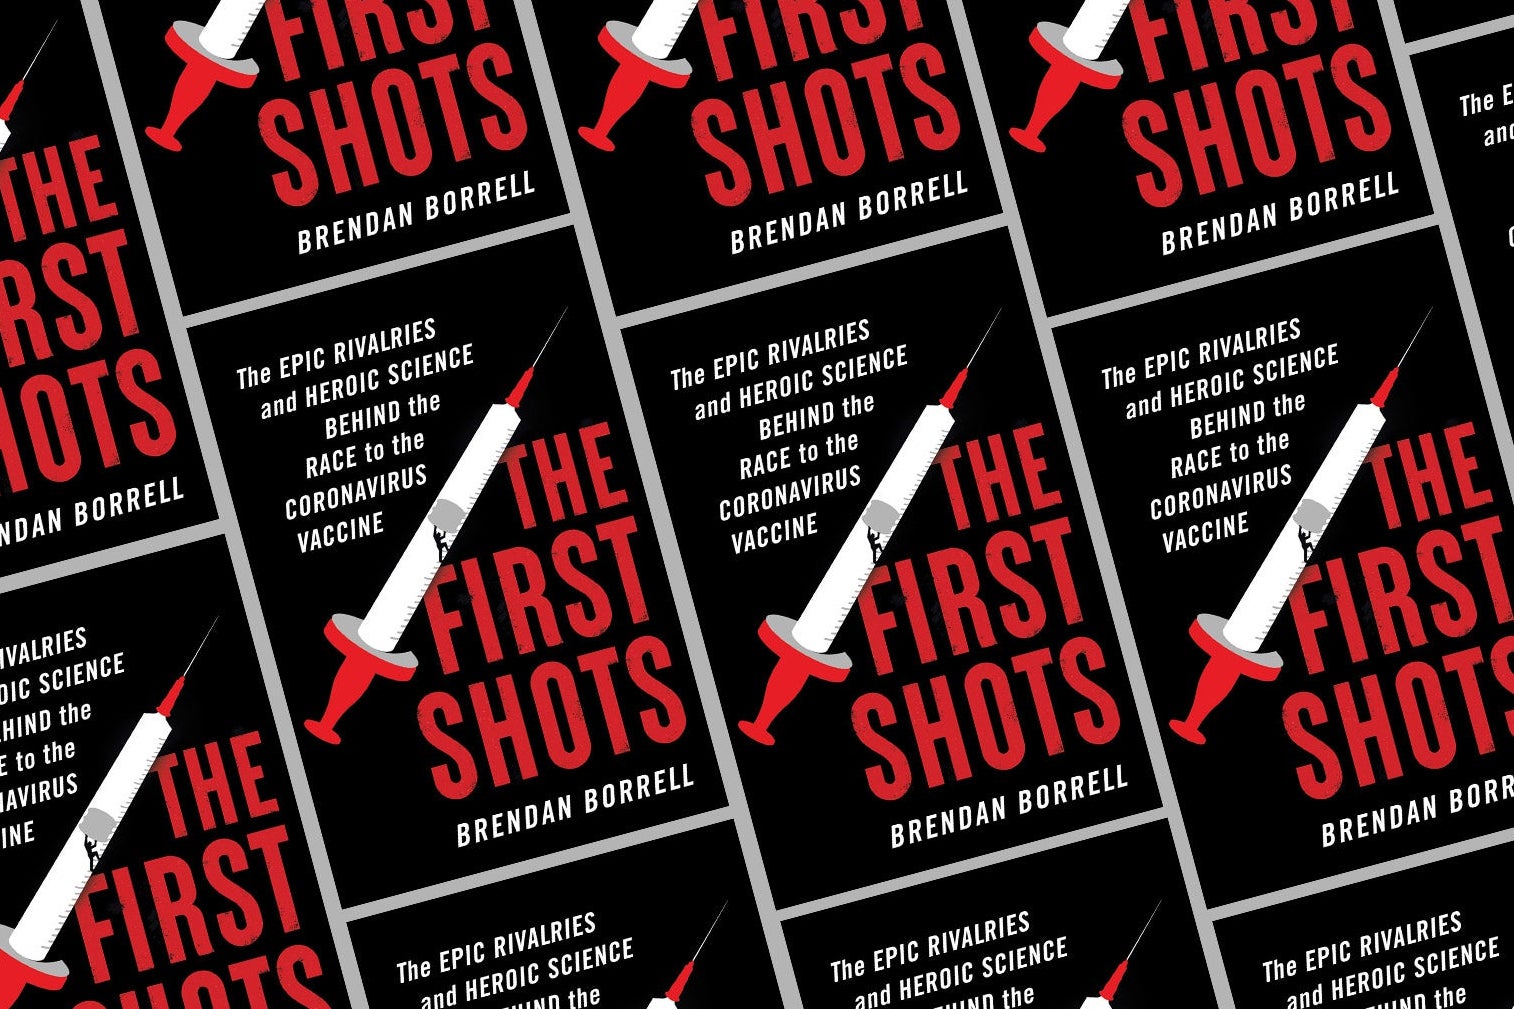 a repeating pattern of a book cover that says "the first shots"